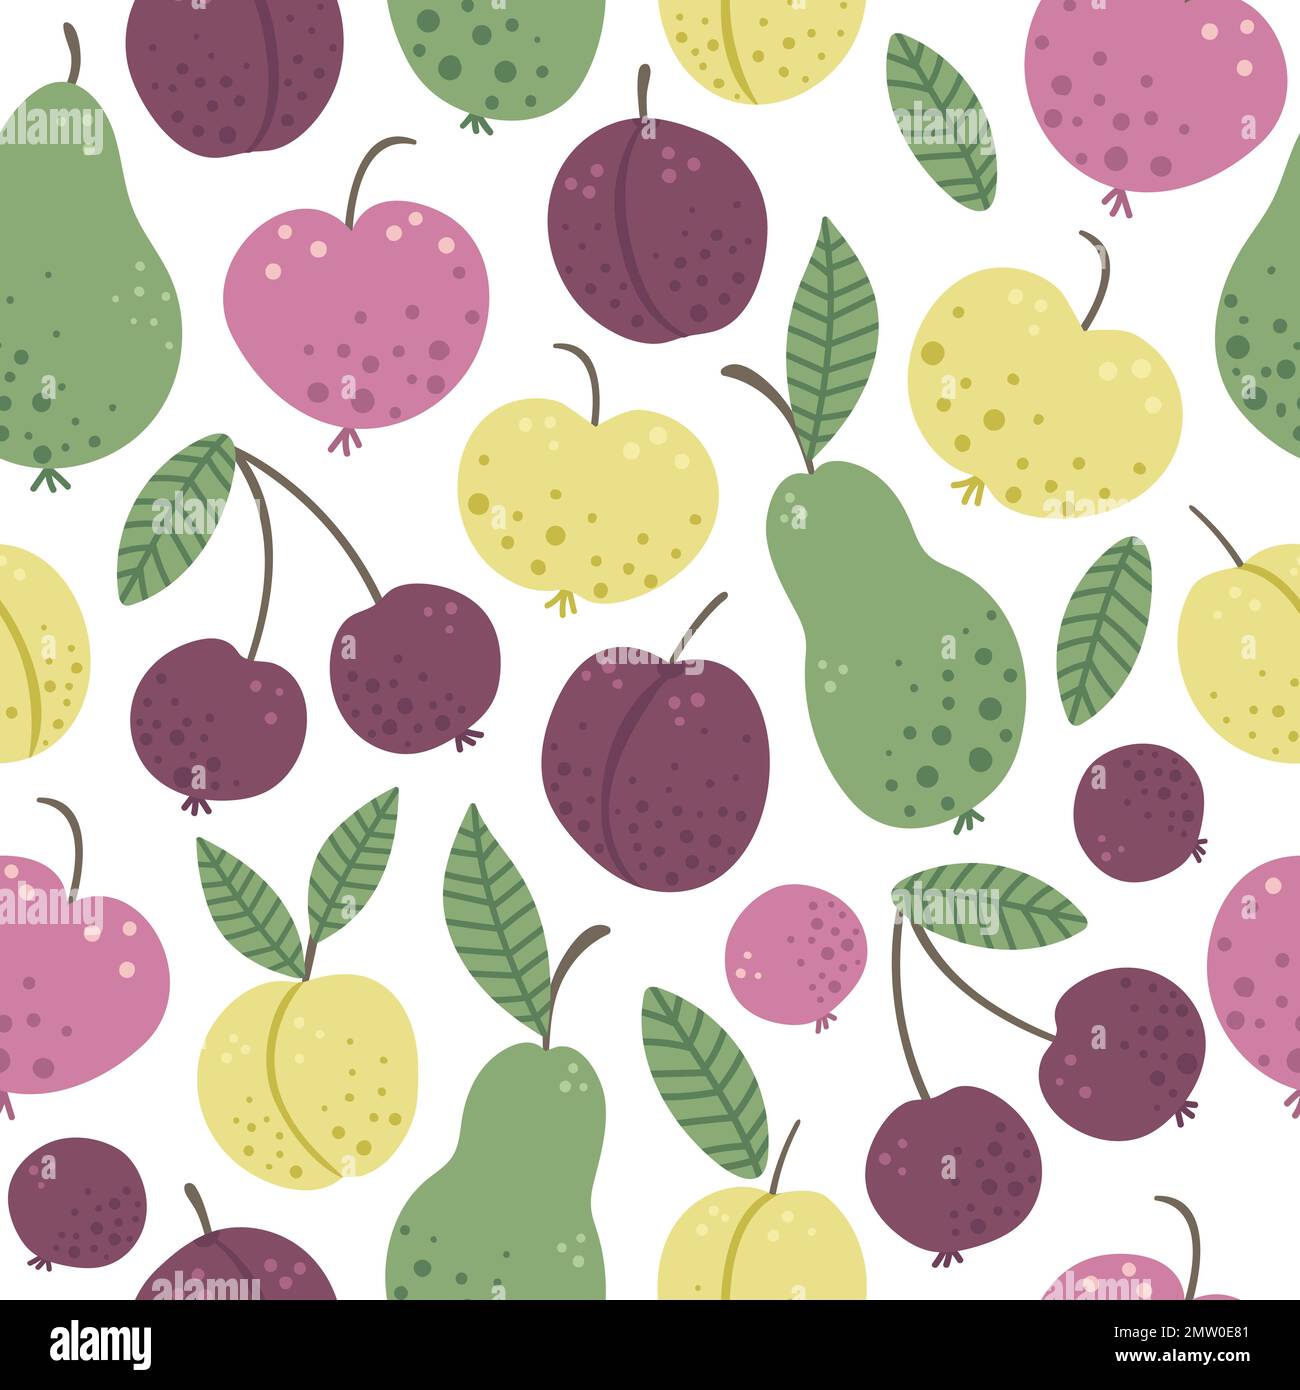 Vector seamless pattern with funny hand drawn flat garden fruits and berries. Colored apple, pear, plum, peach, cherry texture. Harvest repeating back Stock Vector